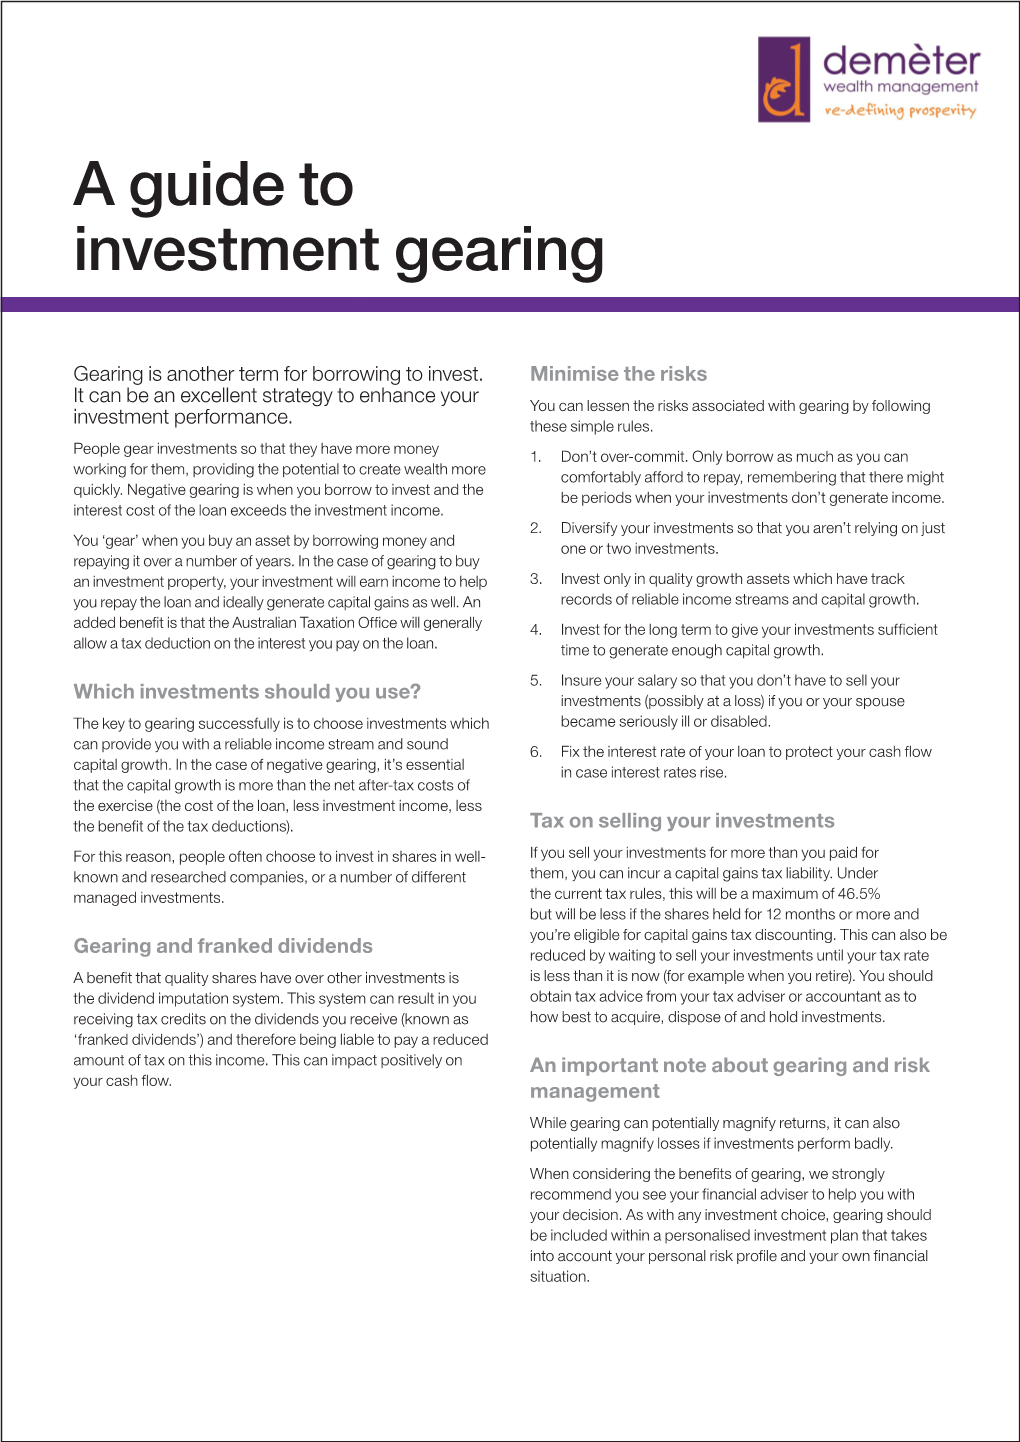 A Guide to Investment Gearing